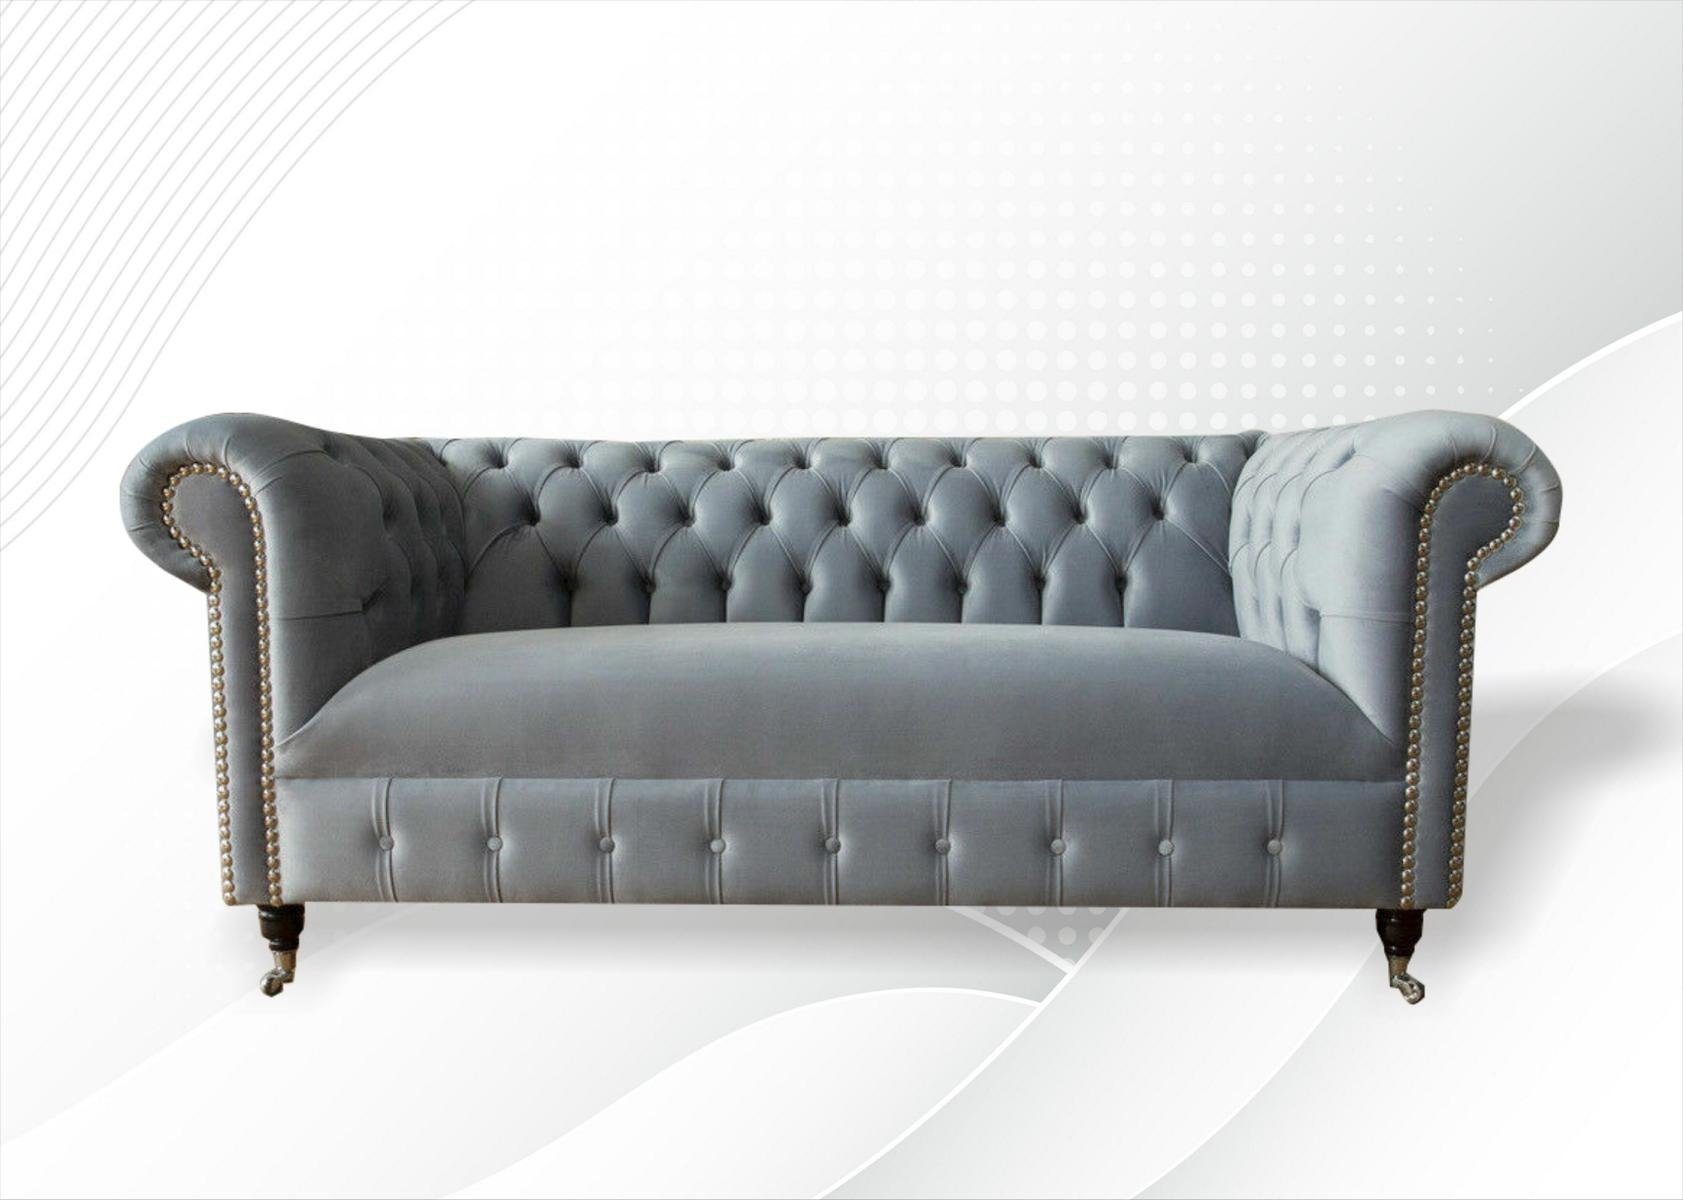 JVmoebel Sofa Chesterfield Sofa Couch Polster Stoff Leder Couchen Textilmöbel, Made in Europe